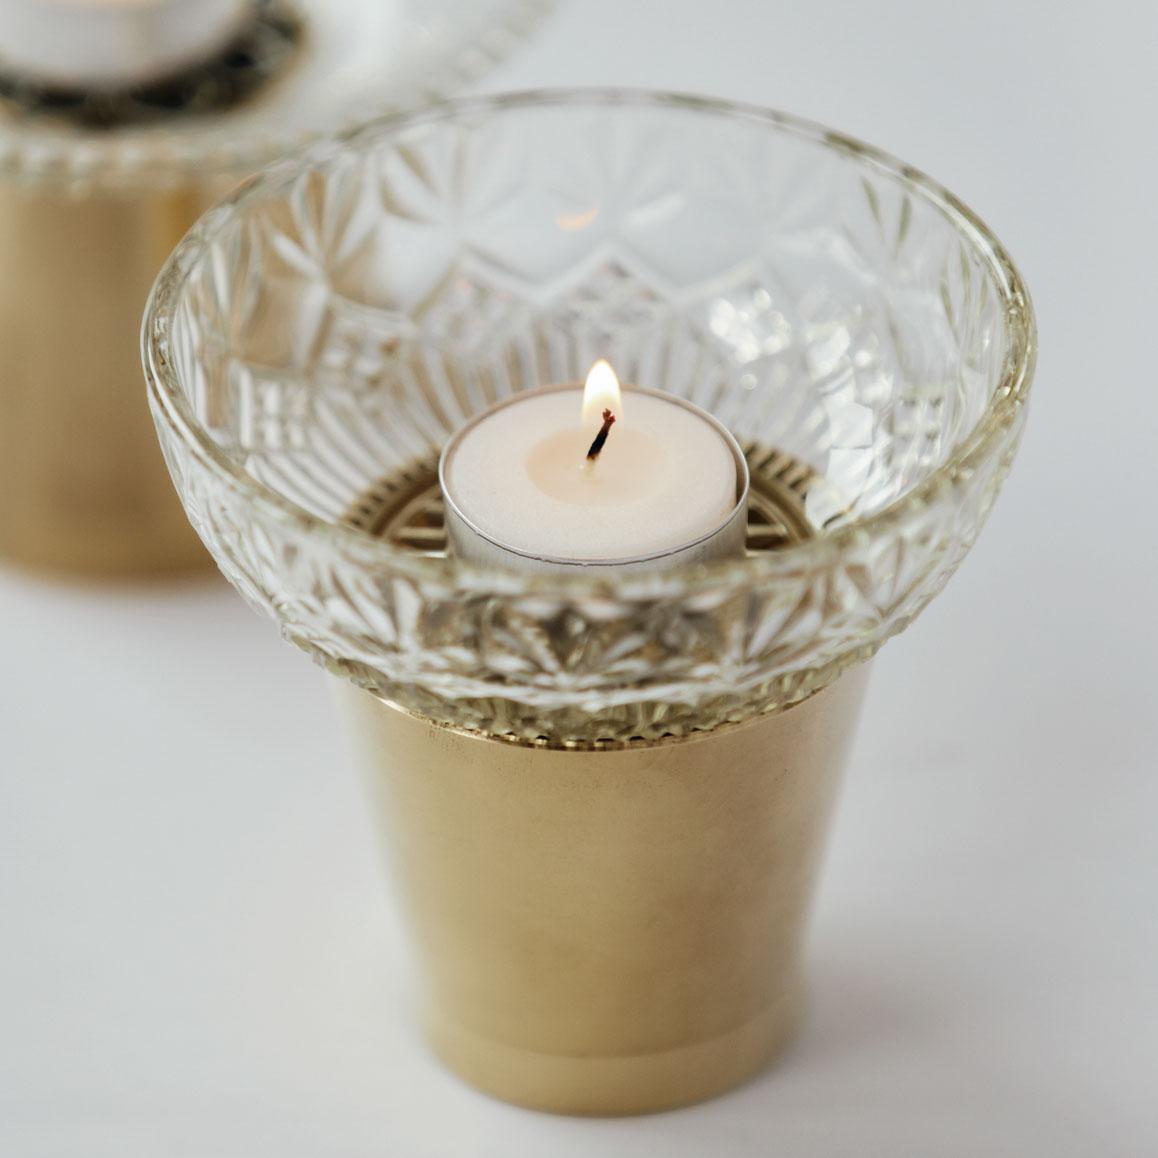 Candleholder designed by Ryosuke Harashima.
This work is made of antique Kiriko glass plate and brass.
Artist create new style candleholder by combining old kiriko glass and Industrial materials. It has both contemporary feeling and folk craft